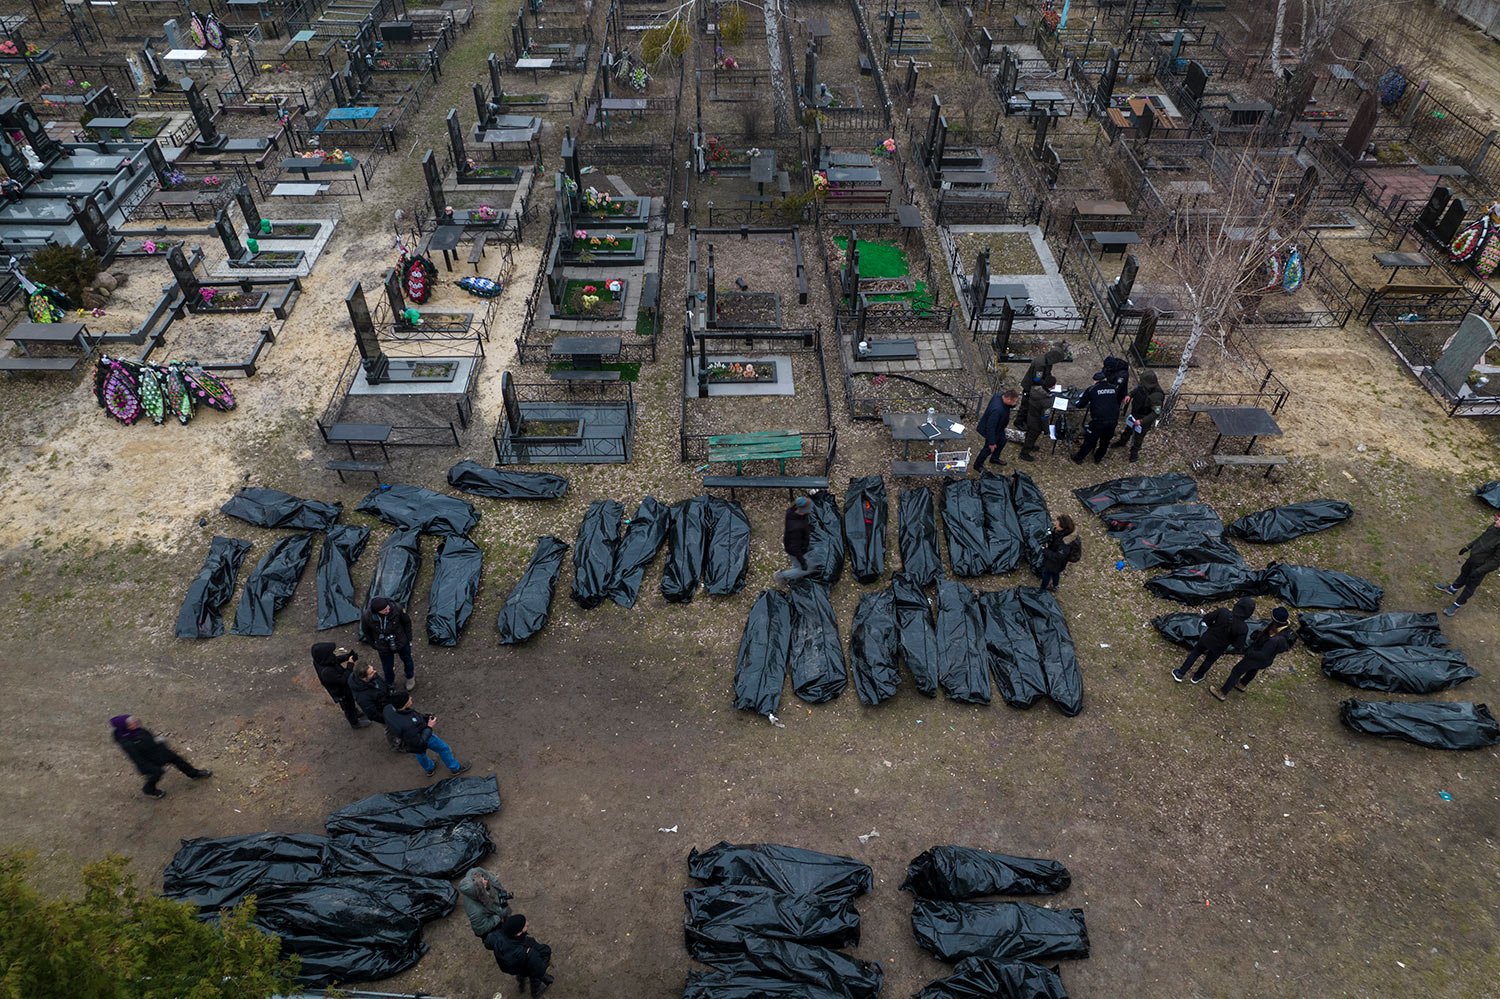  Policemen work on the identification process following the killing of civilians in Bucha, before sending the bodies to the morgue, on the outskirts of Kyiv, Ukraine, Wednesday, April 6, 2022. (AP Photo/Rodrigo Abd) 